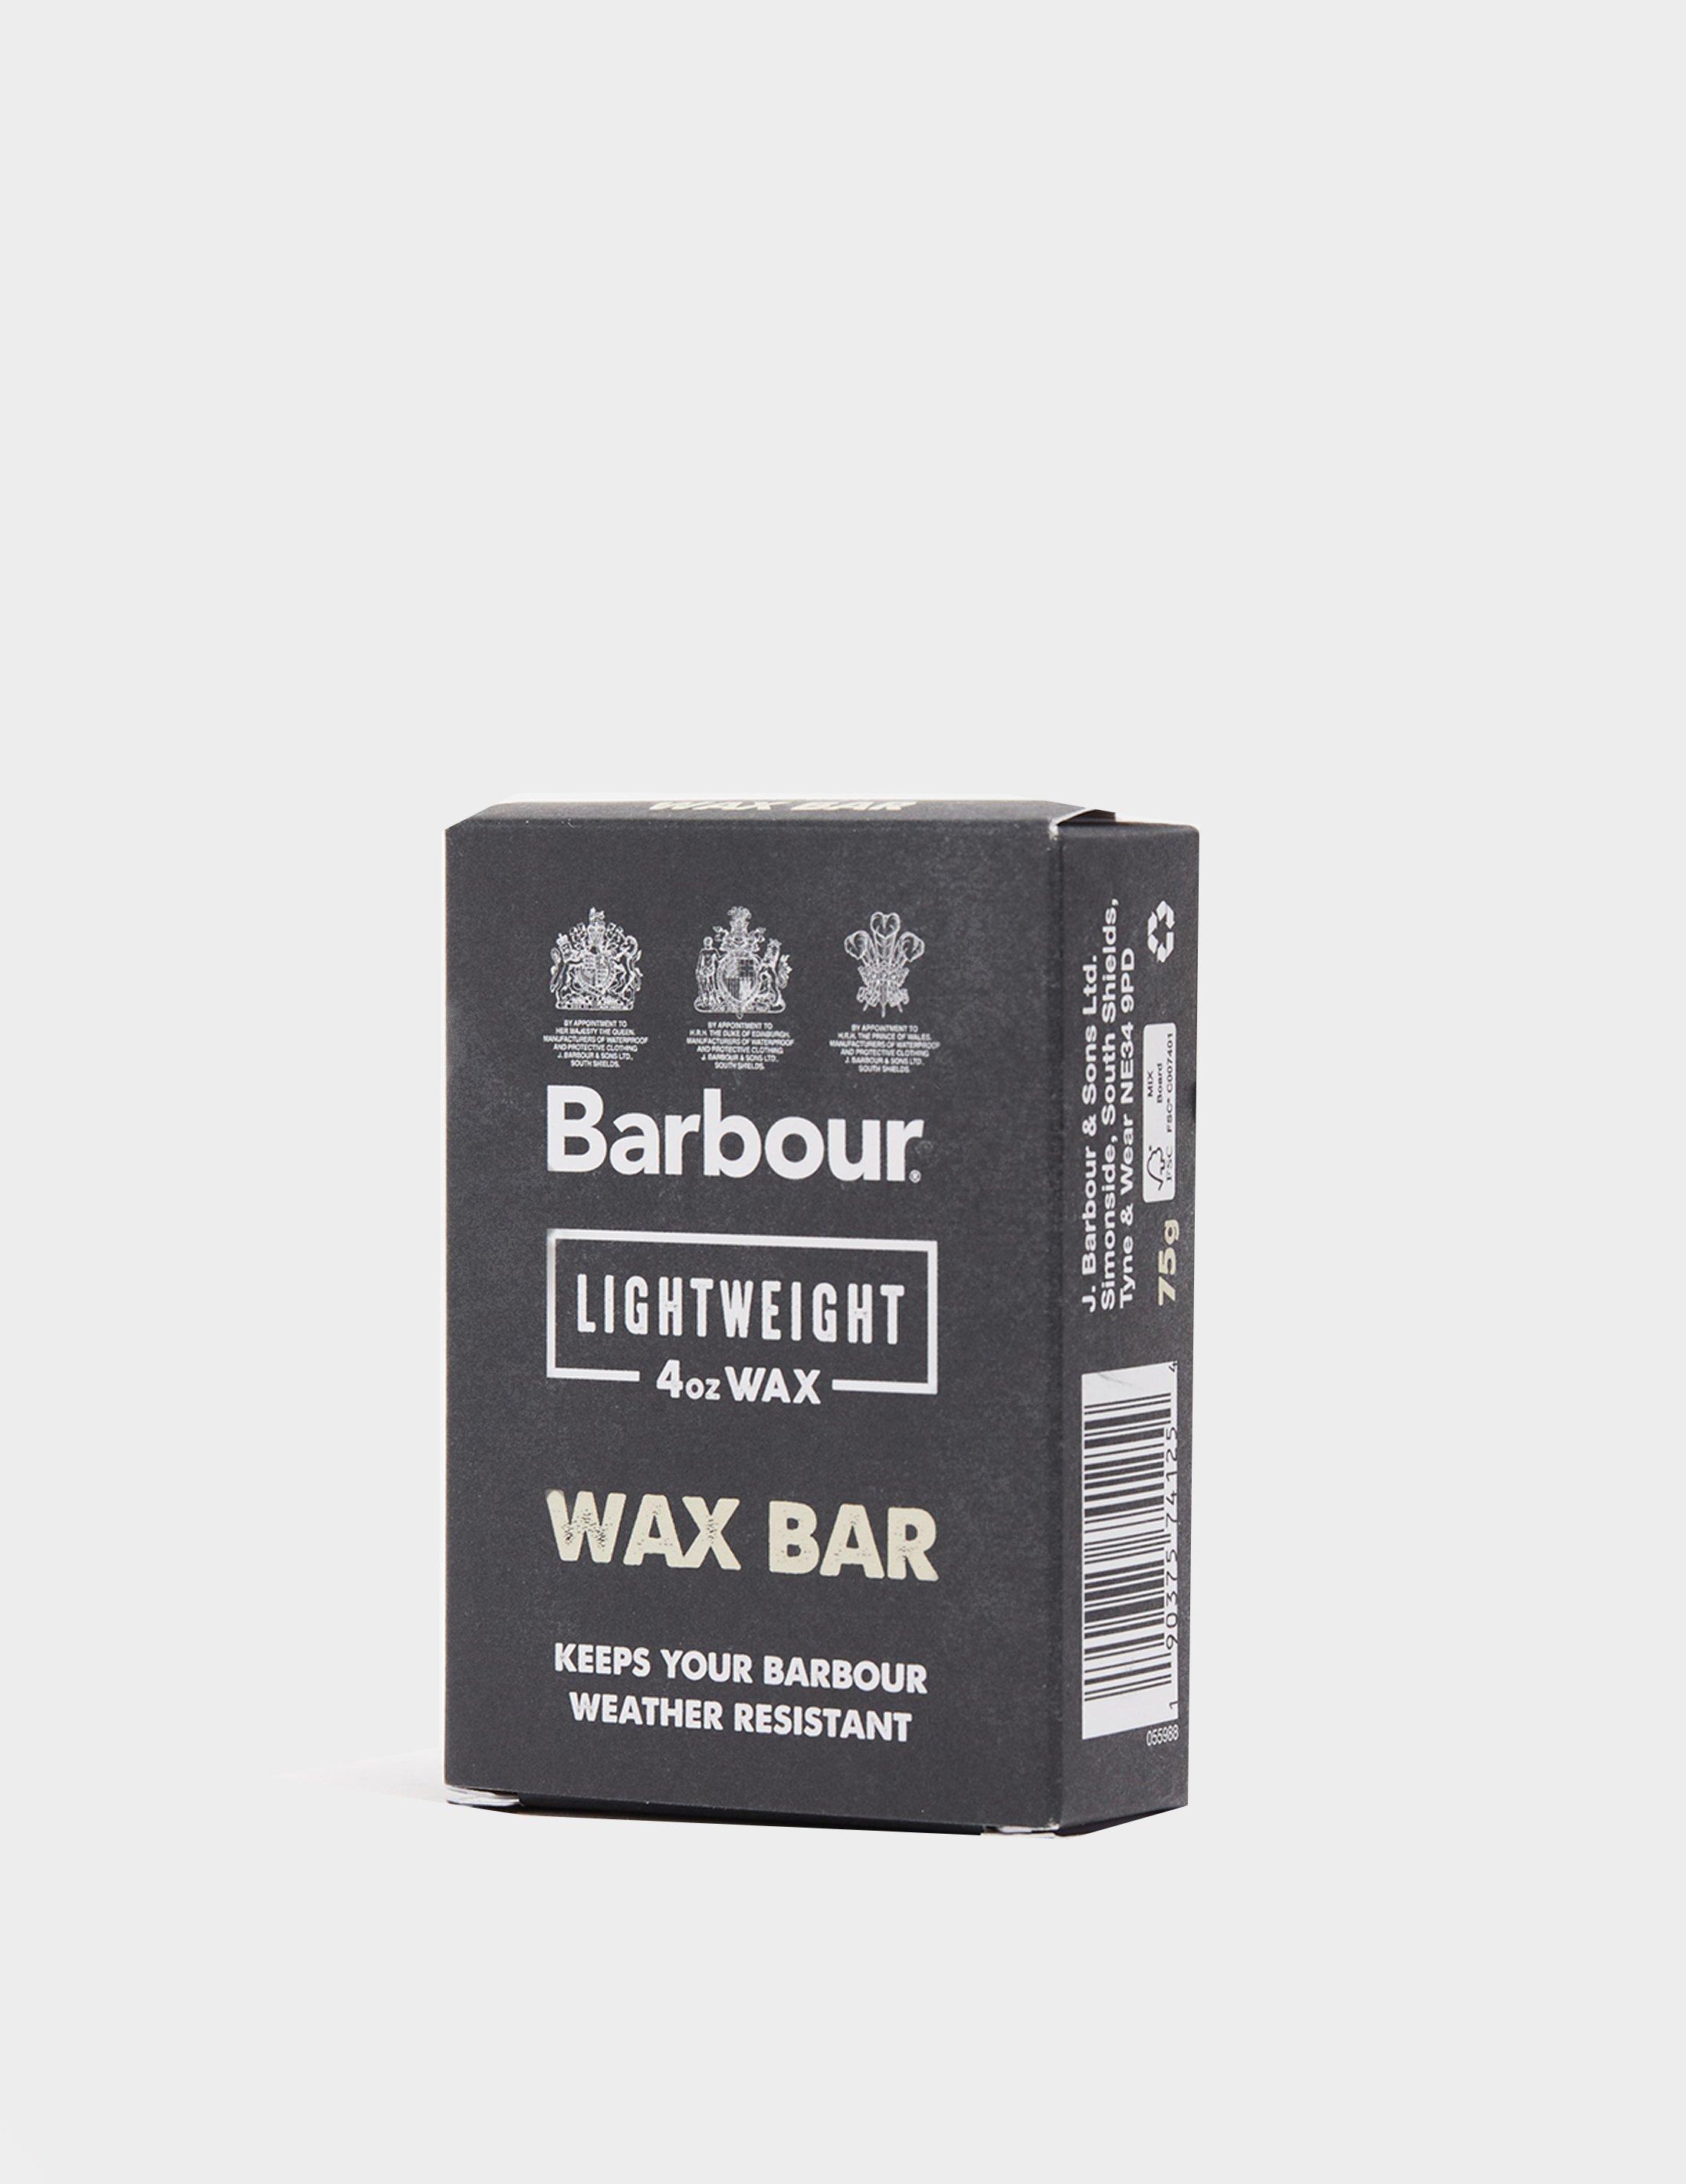 barbour wax dressing